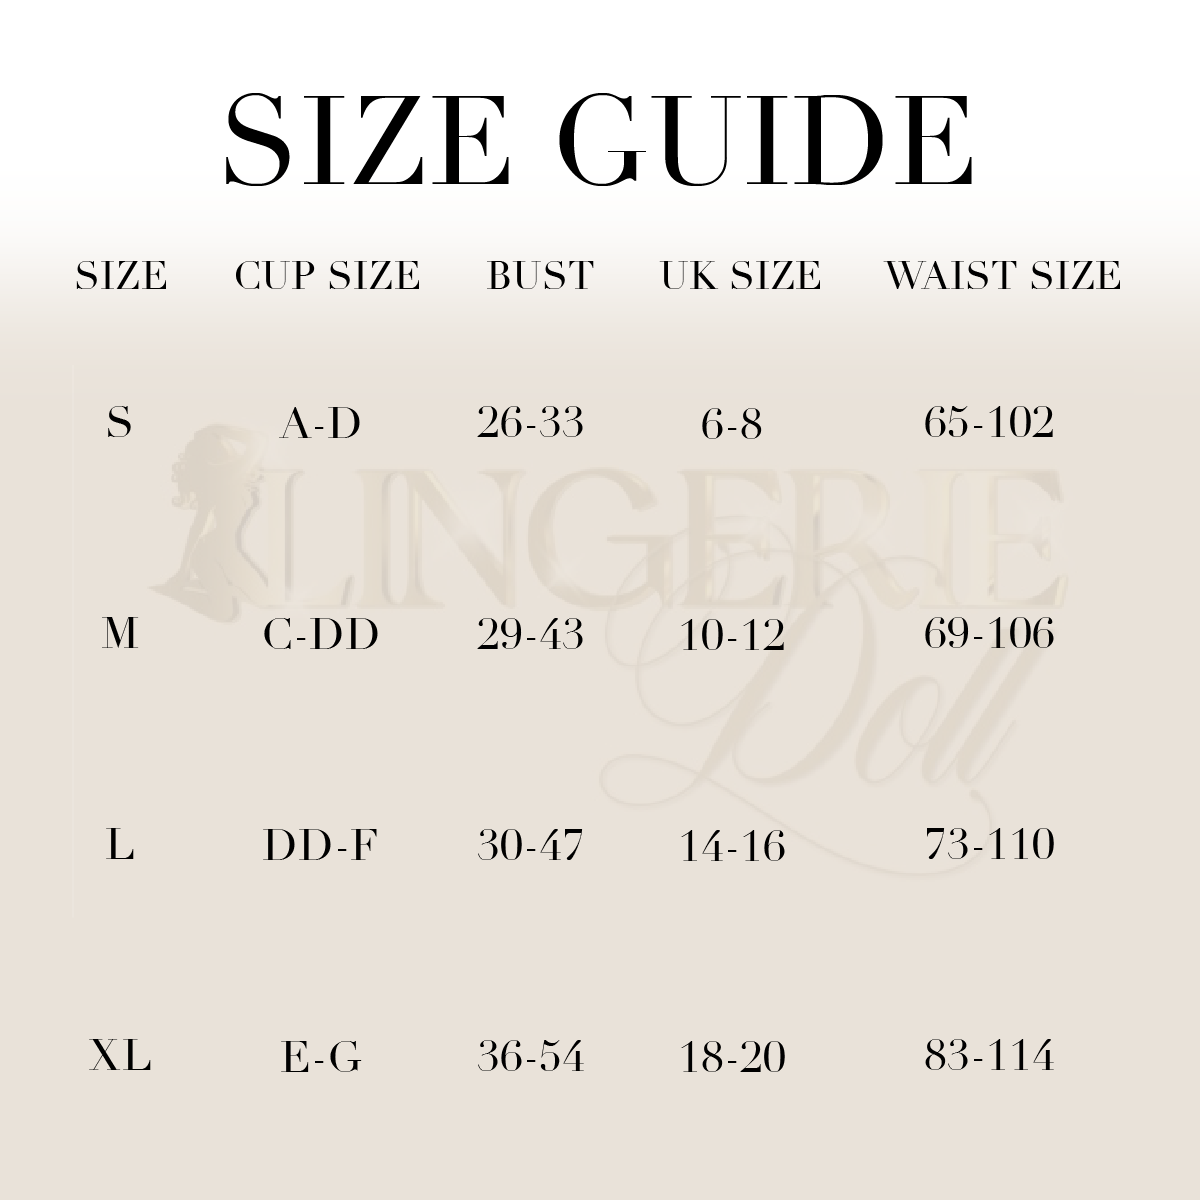 View the Lingerie Sizing Chart